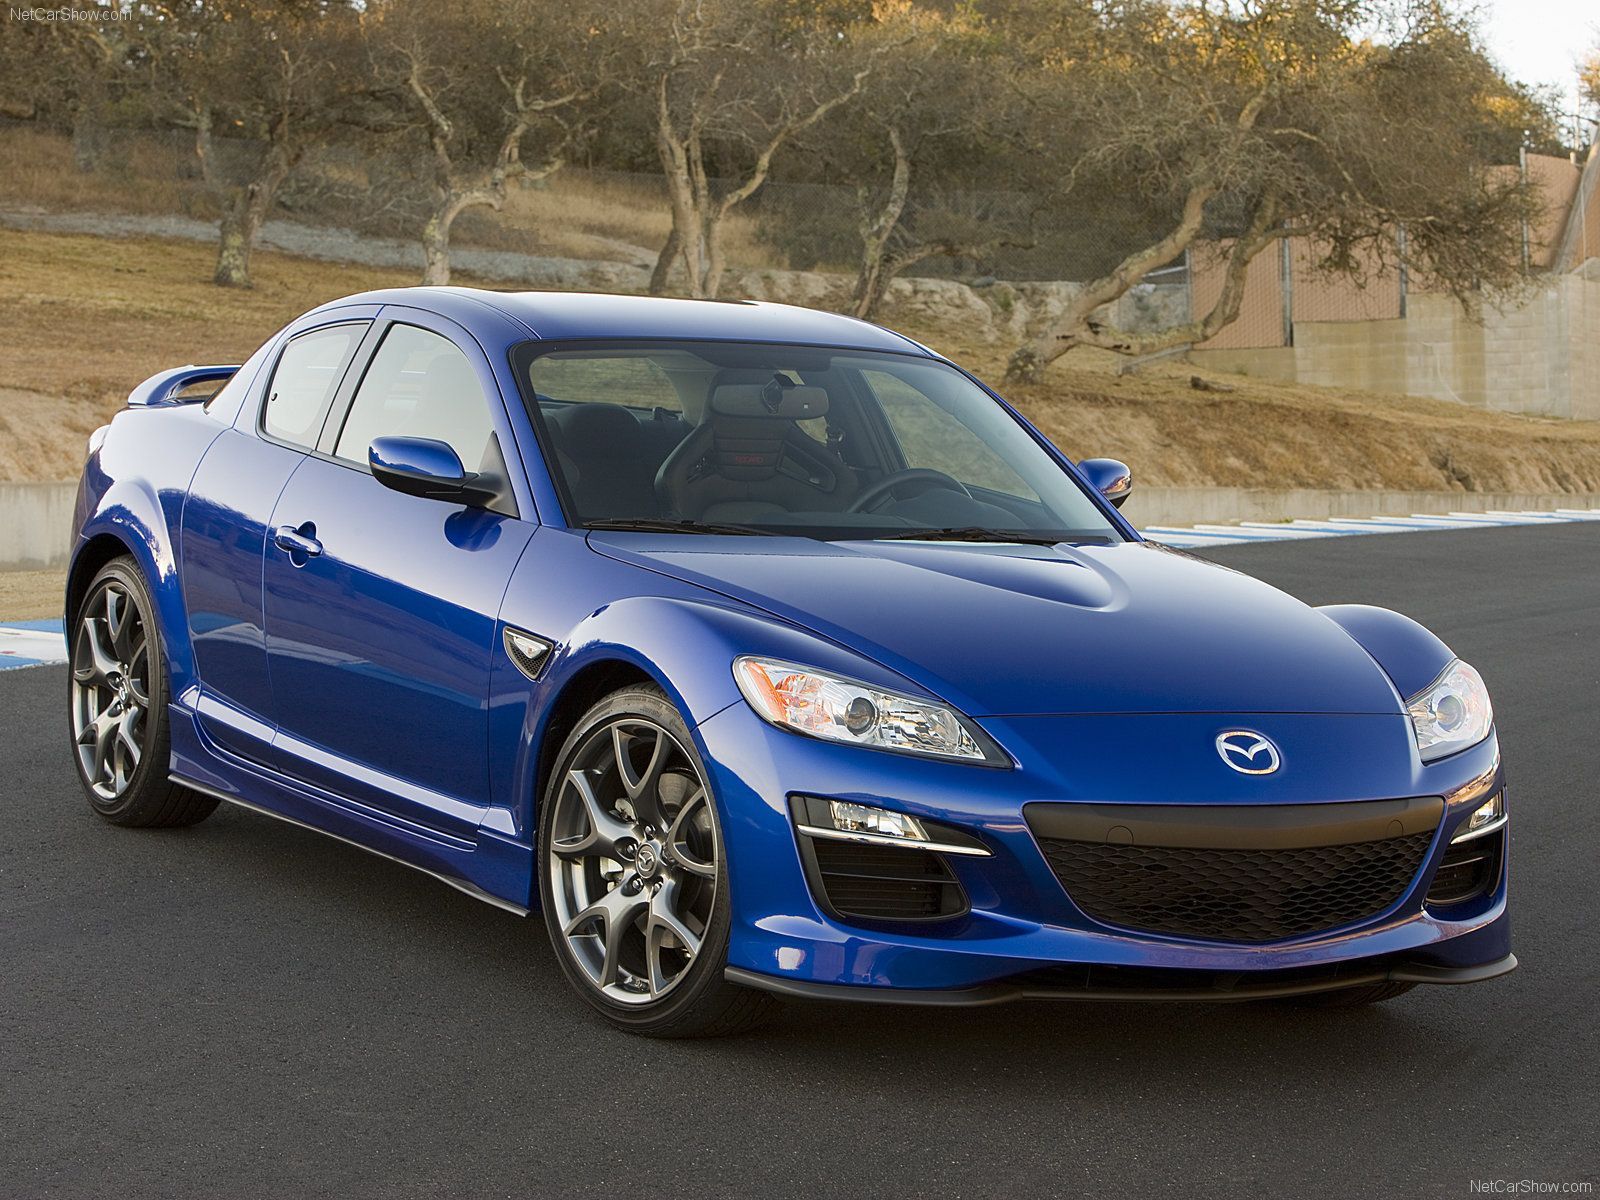 Awesome Mazda Sports Cars Every Gearhead Should Own